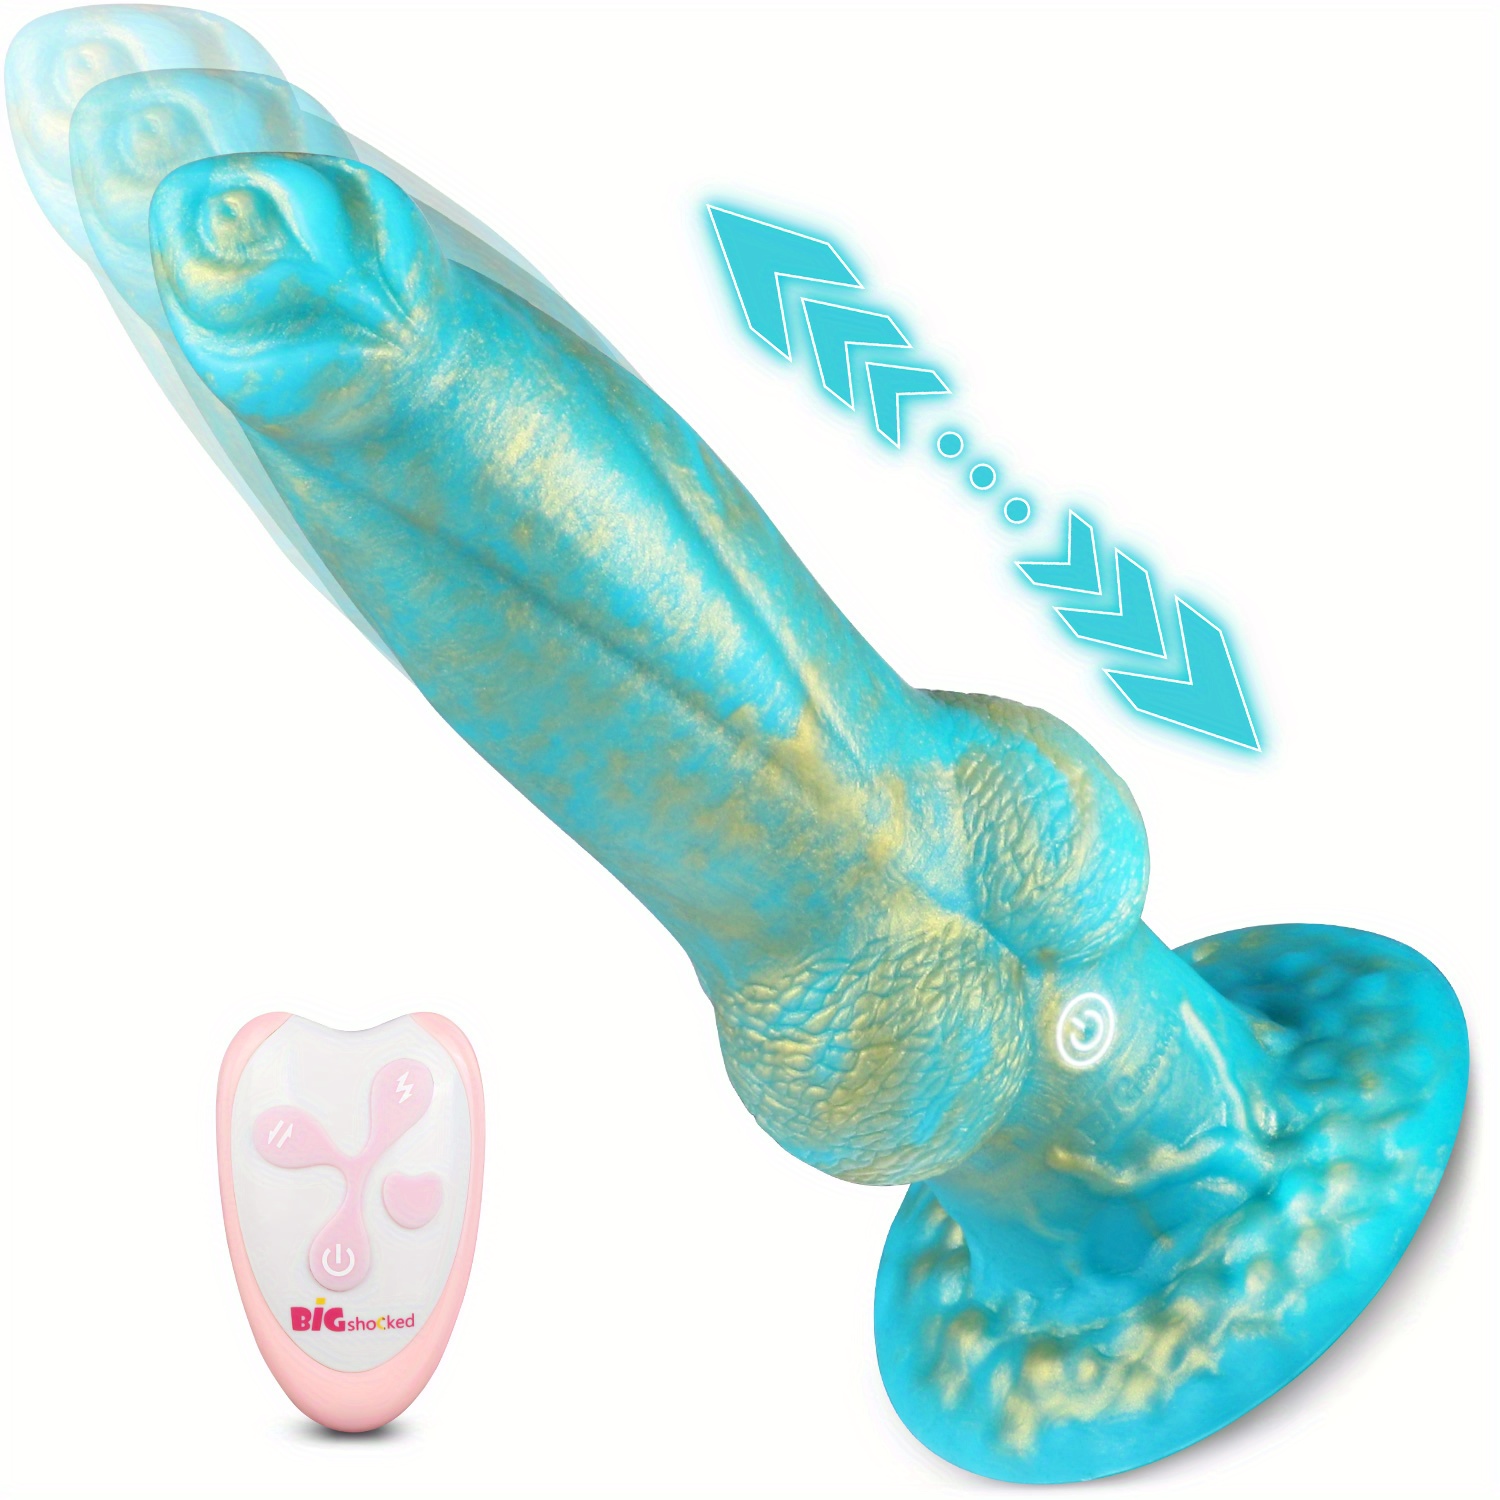 Thrusting Dildo Vibrator Sex Toy For Women, Realistic Huge Vibrating Dildo With 7 Thrust and Vibration For G-spot Anal Stimulation, Knotted Silicone Dildos Adult Sex Toys and Games For Woman Couples -